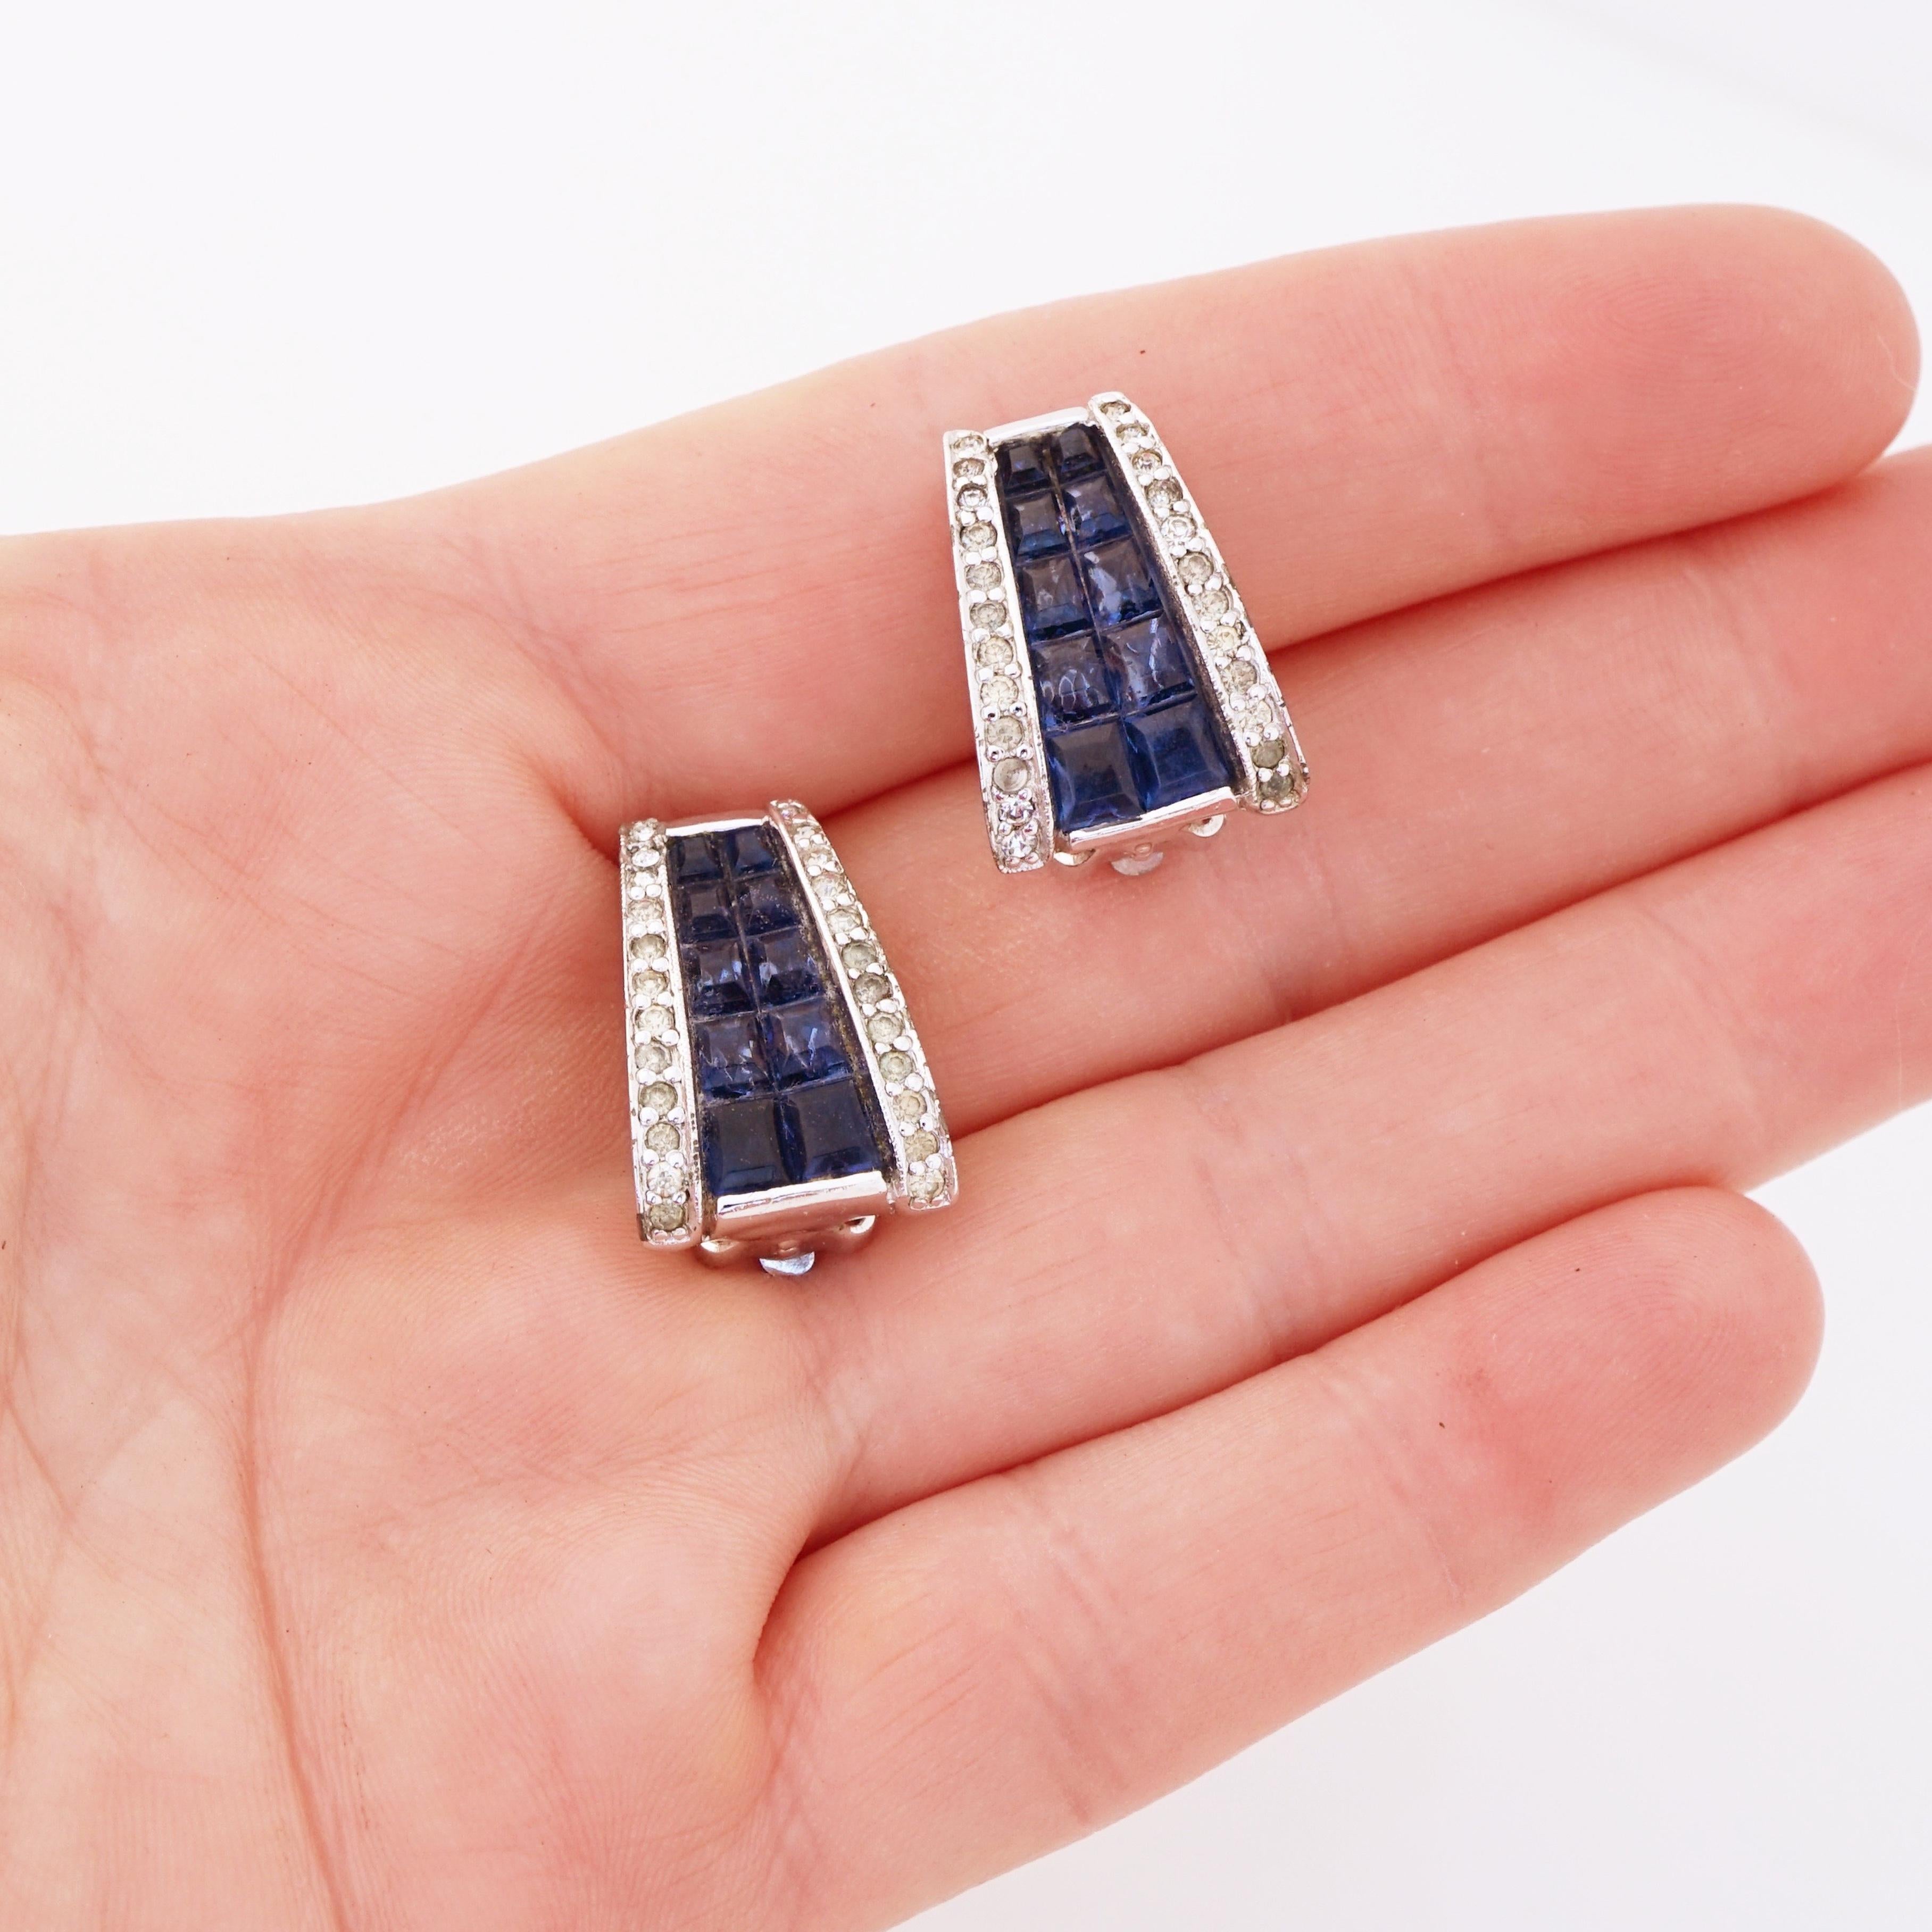 Silver Art Deco Huggie Earrings With Sapphire Crystals By Jomaz, 1950s 1